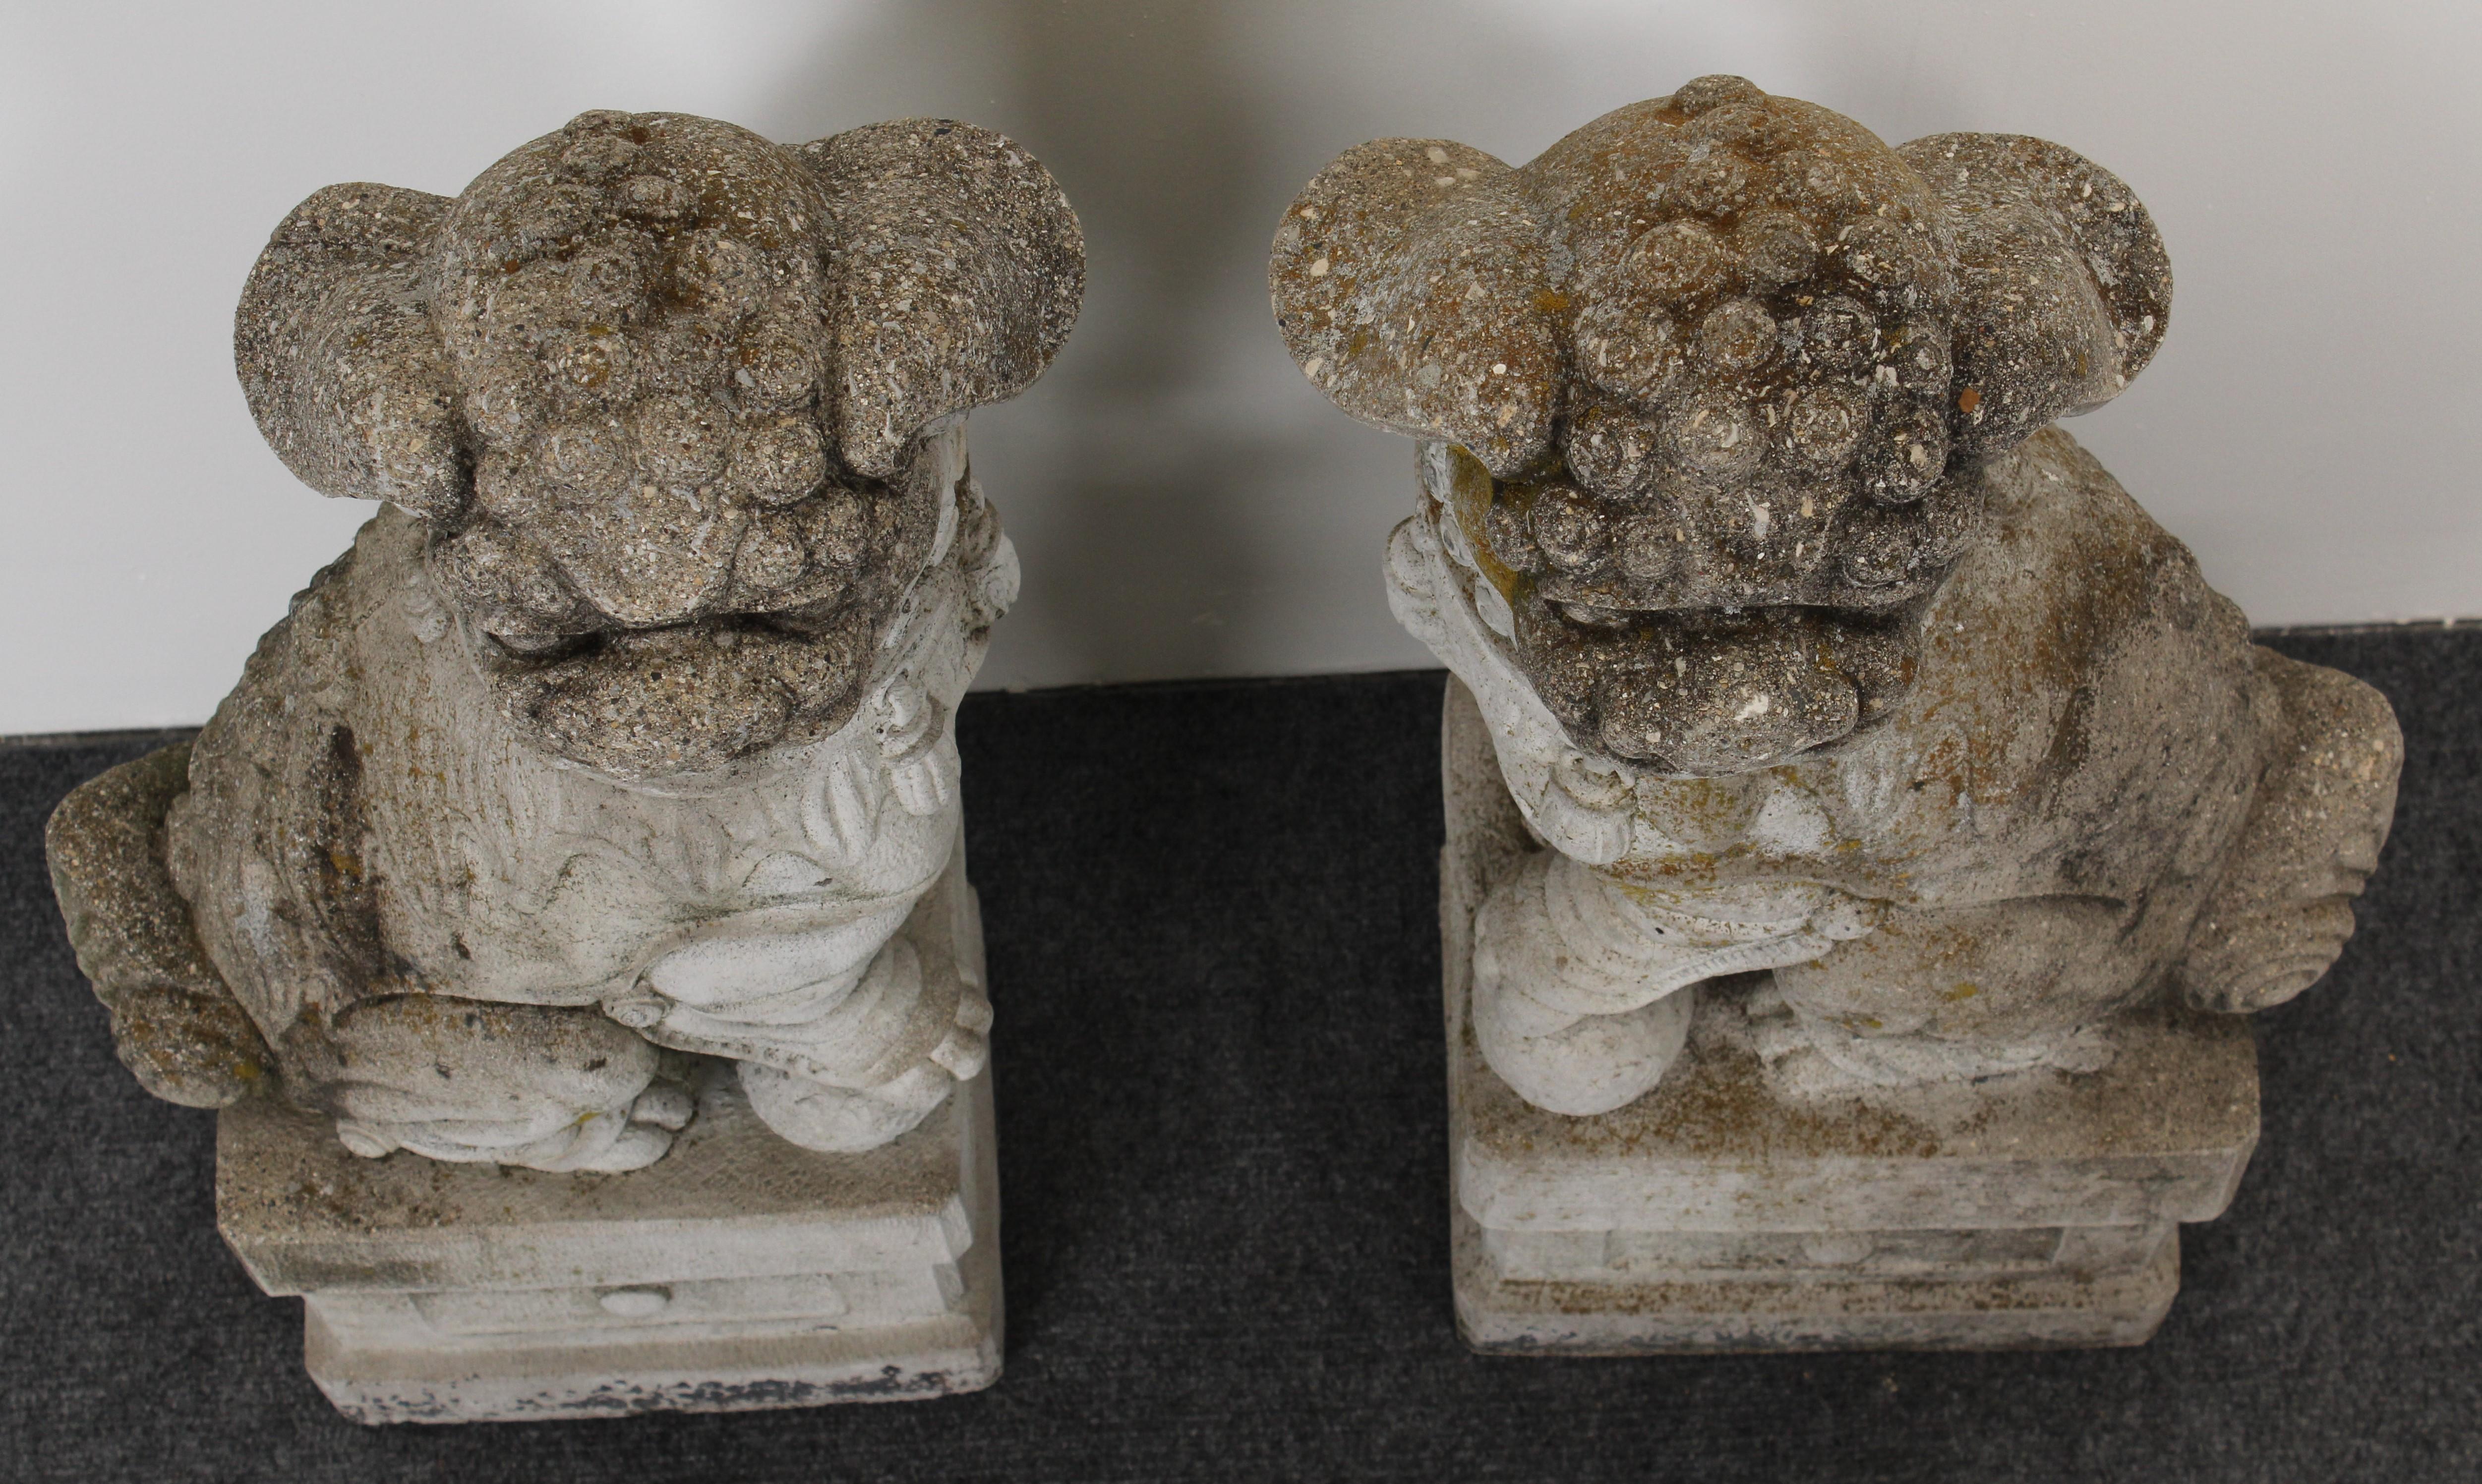 A stately pair of cast stone foo dogs garden statues with a nice patina of lichen and moss.

Dimensions: 31.5